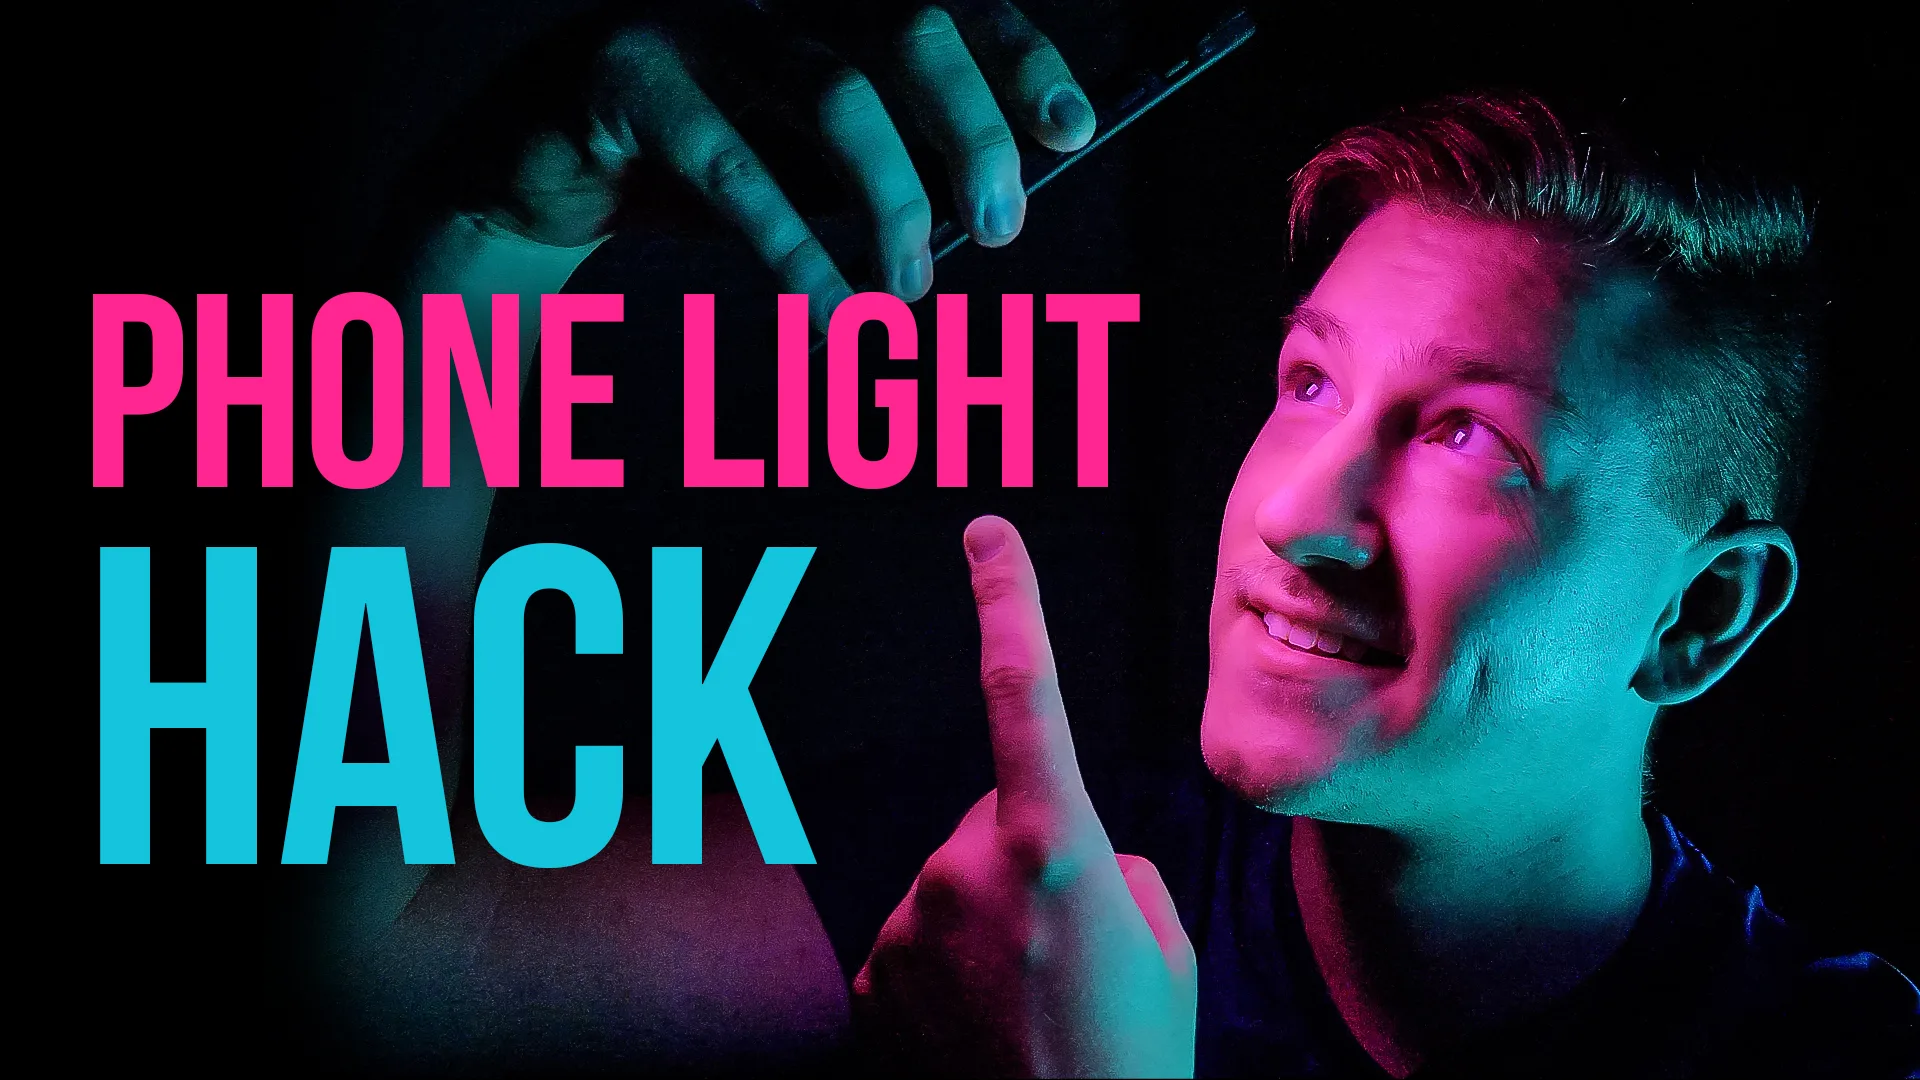 Read more about the article Phone LED Light HACK: How to Light COLORFUL Portraits with Your Smartphone